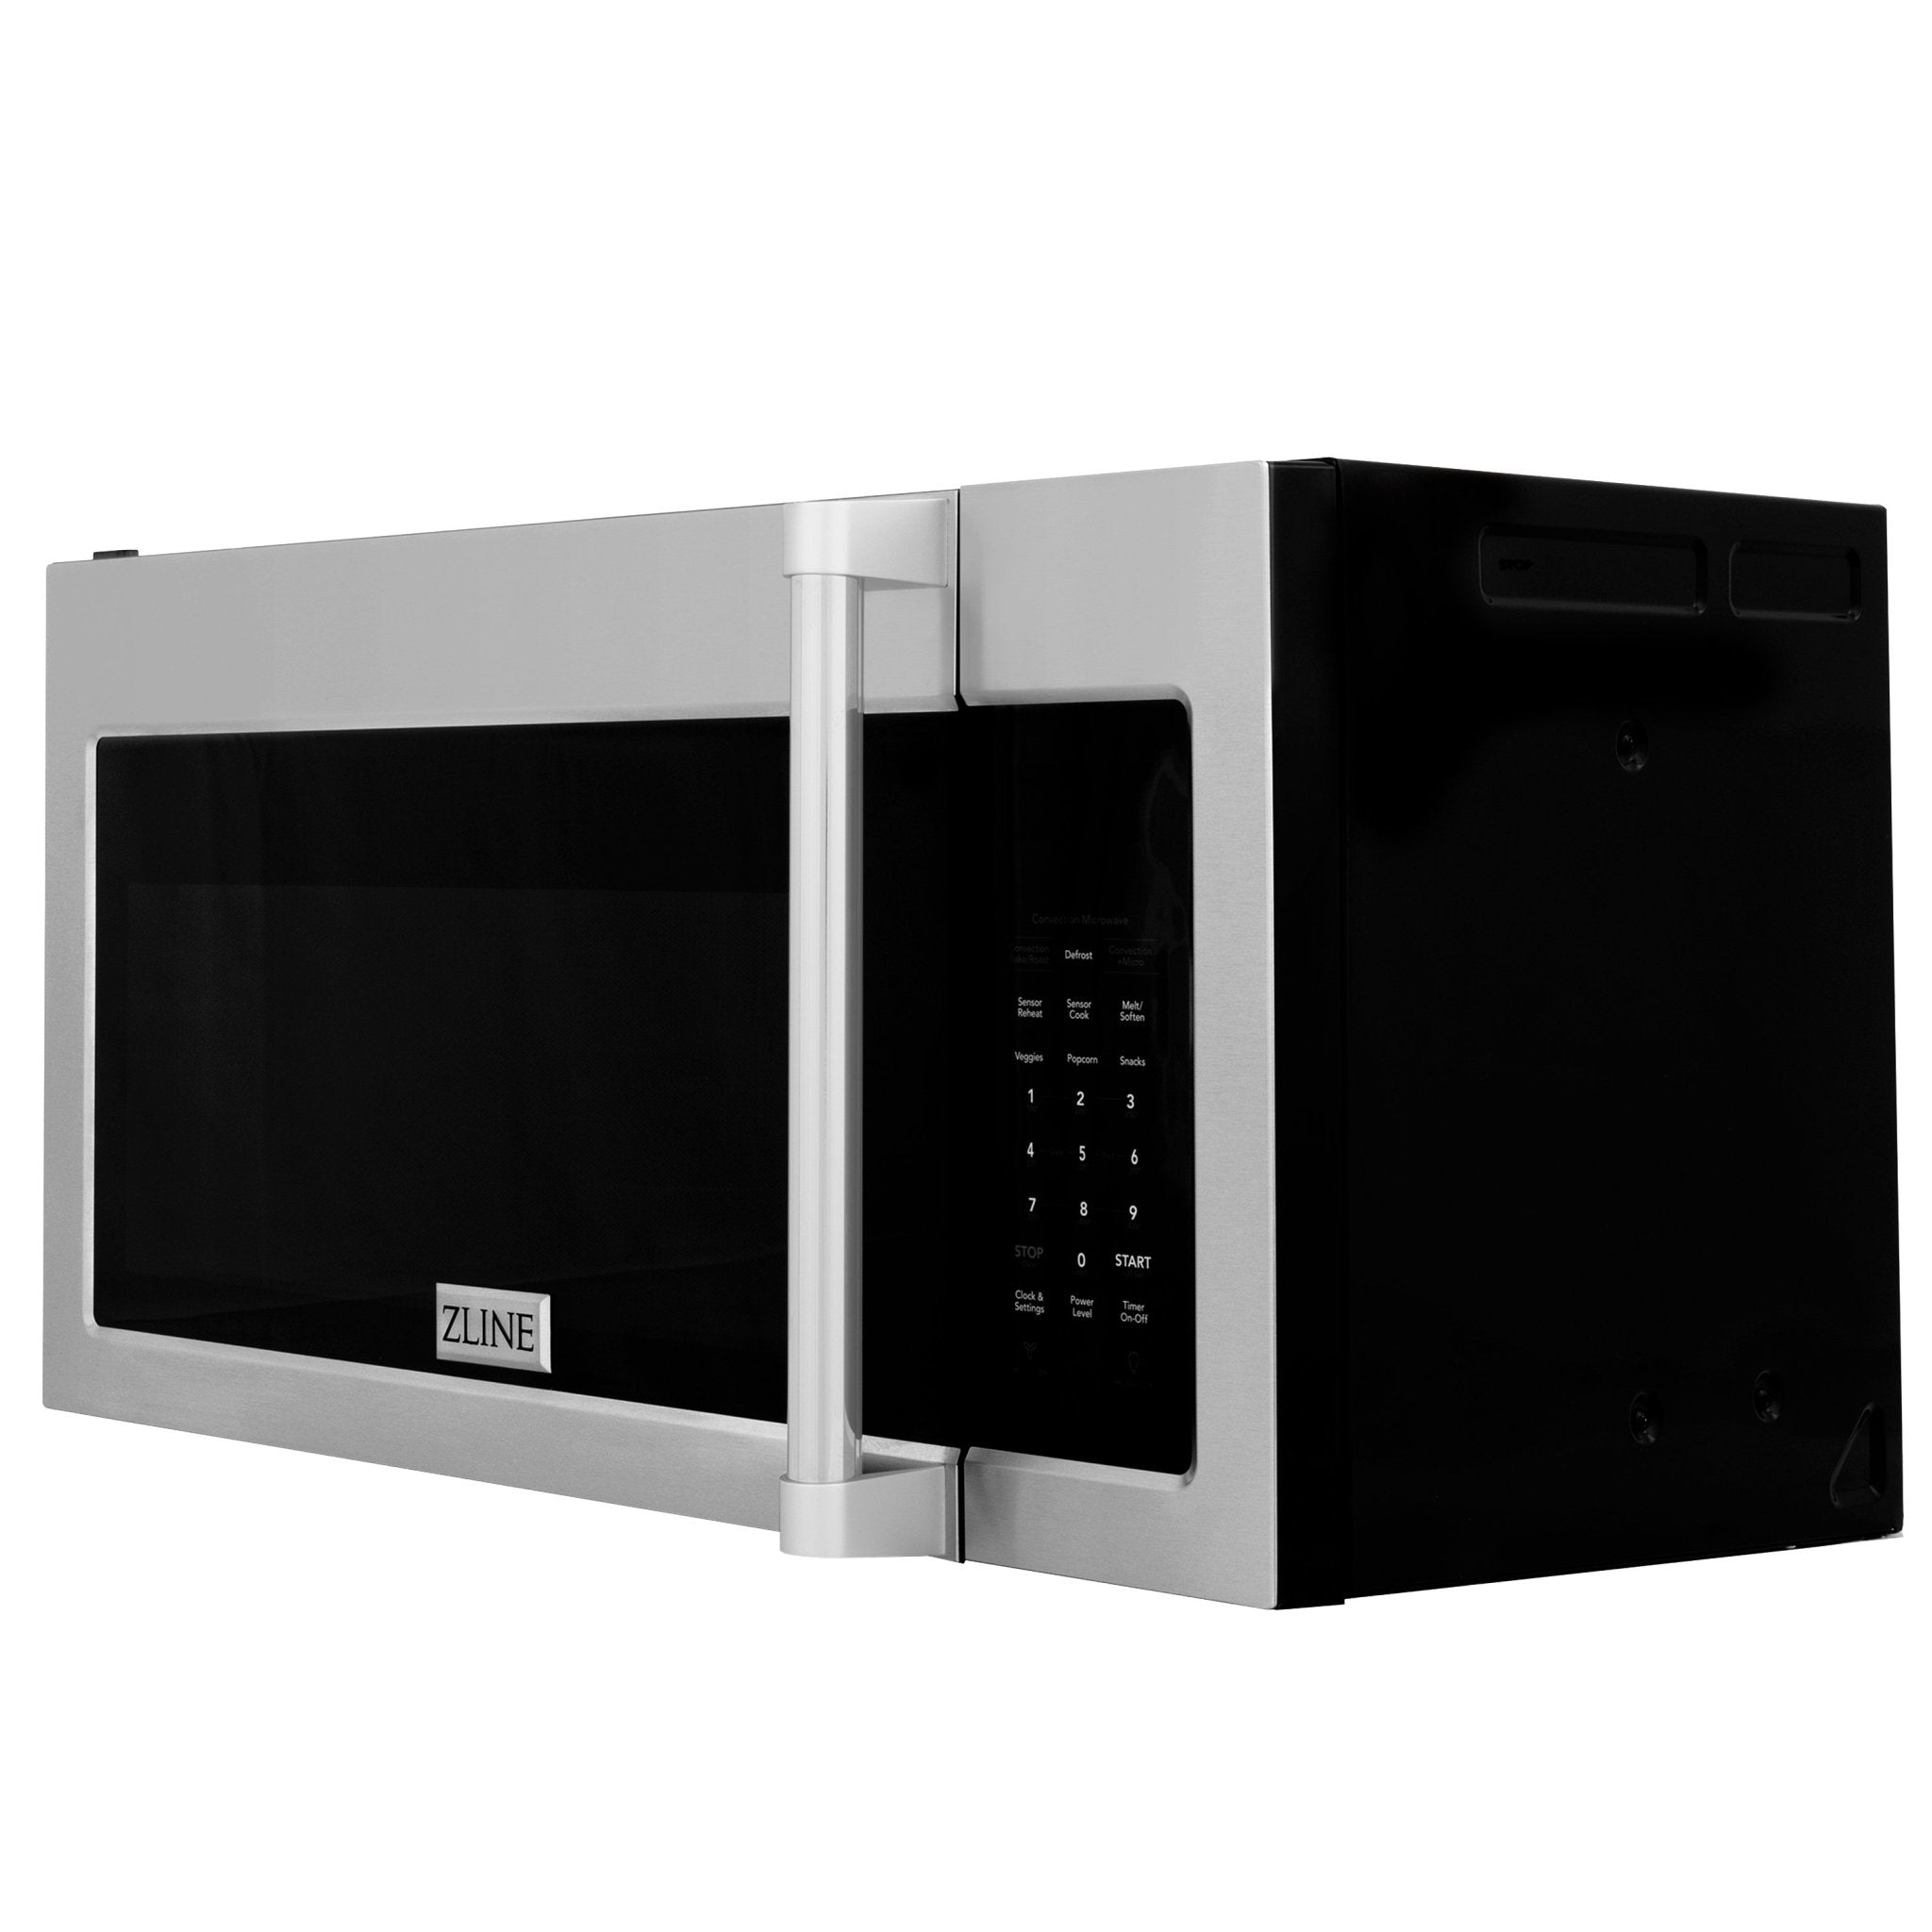 ZLINE Kitchen and Bath, ZLINE Over the Range Microwave Oven with Traditional Handle, MWO-OTR-H-30, ZLINE Over the Range Microwave Oven with Modern Handle (MWO-OTR-H-30)